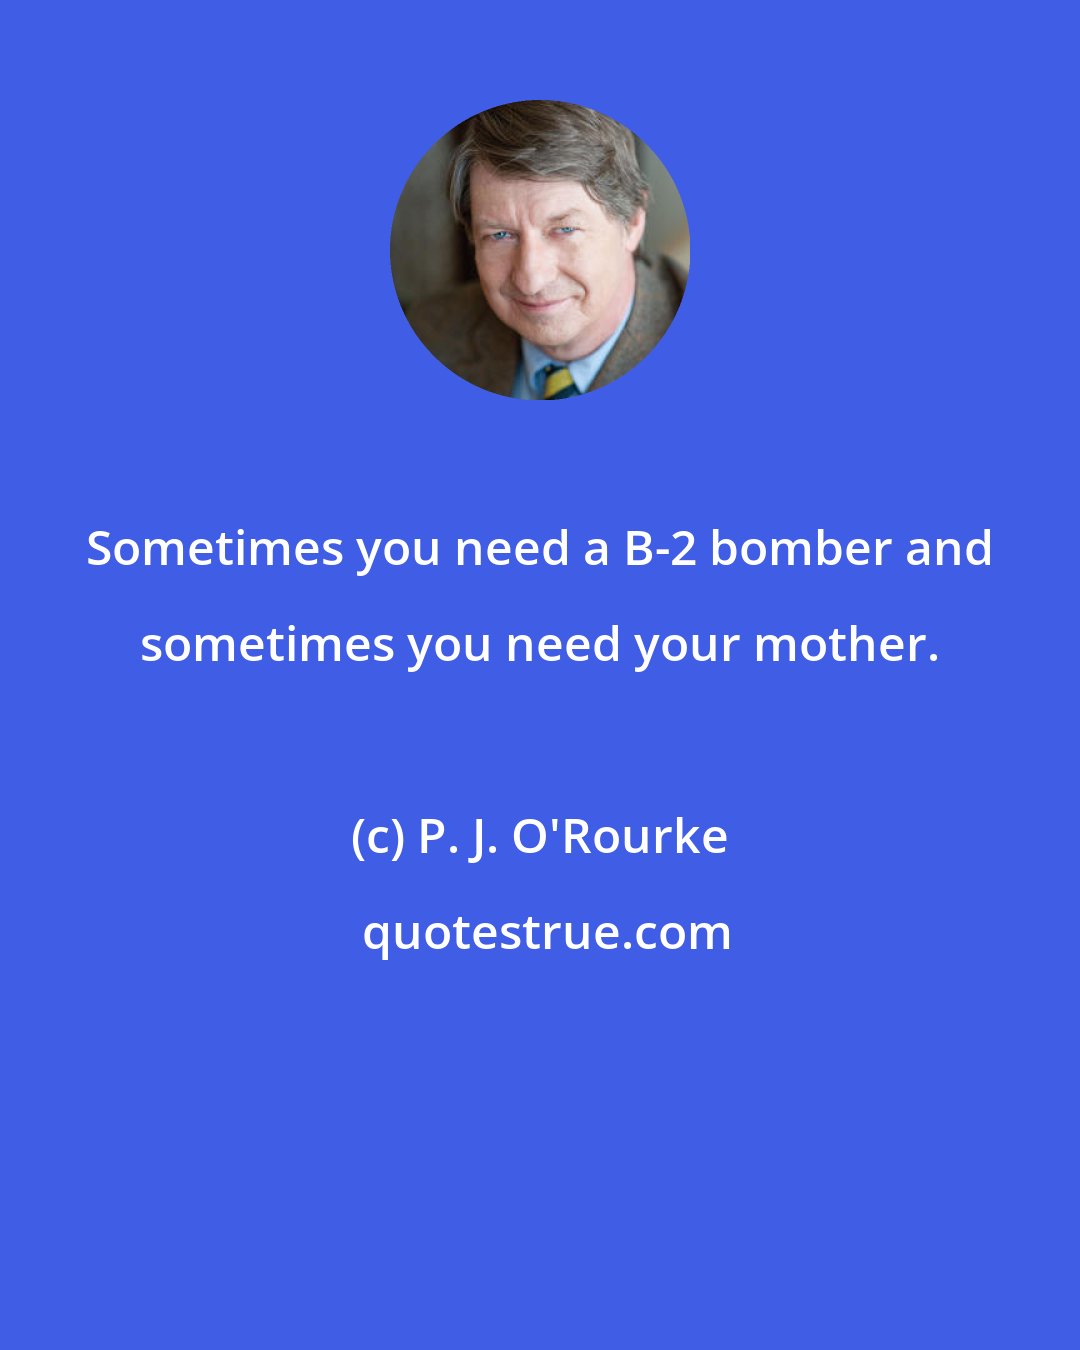 P. J. O'Rourke: Sometimes you need a B-2 bomber and sometimes you need your mother.